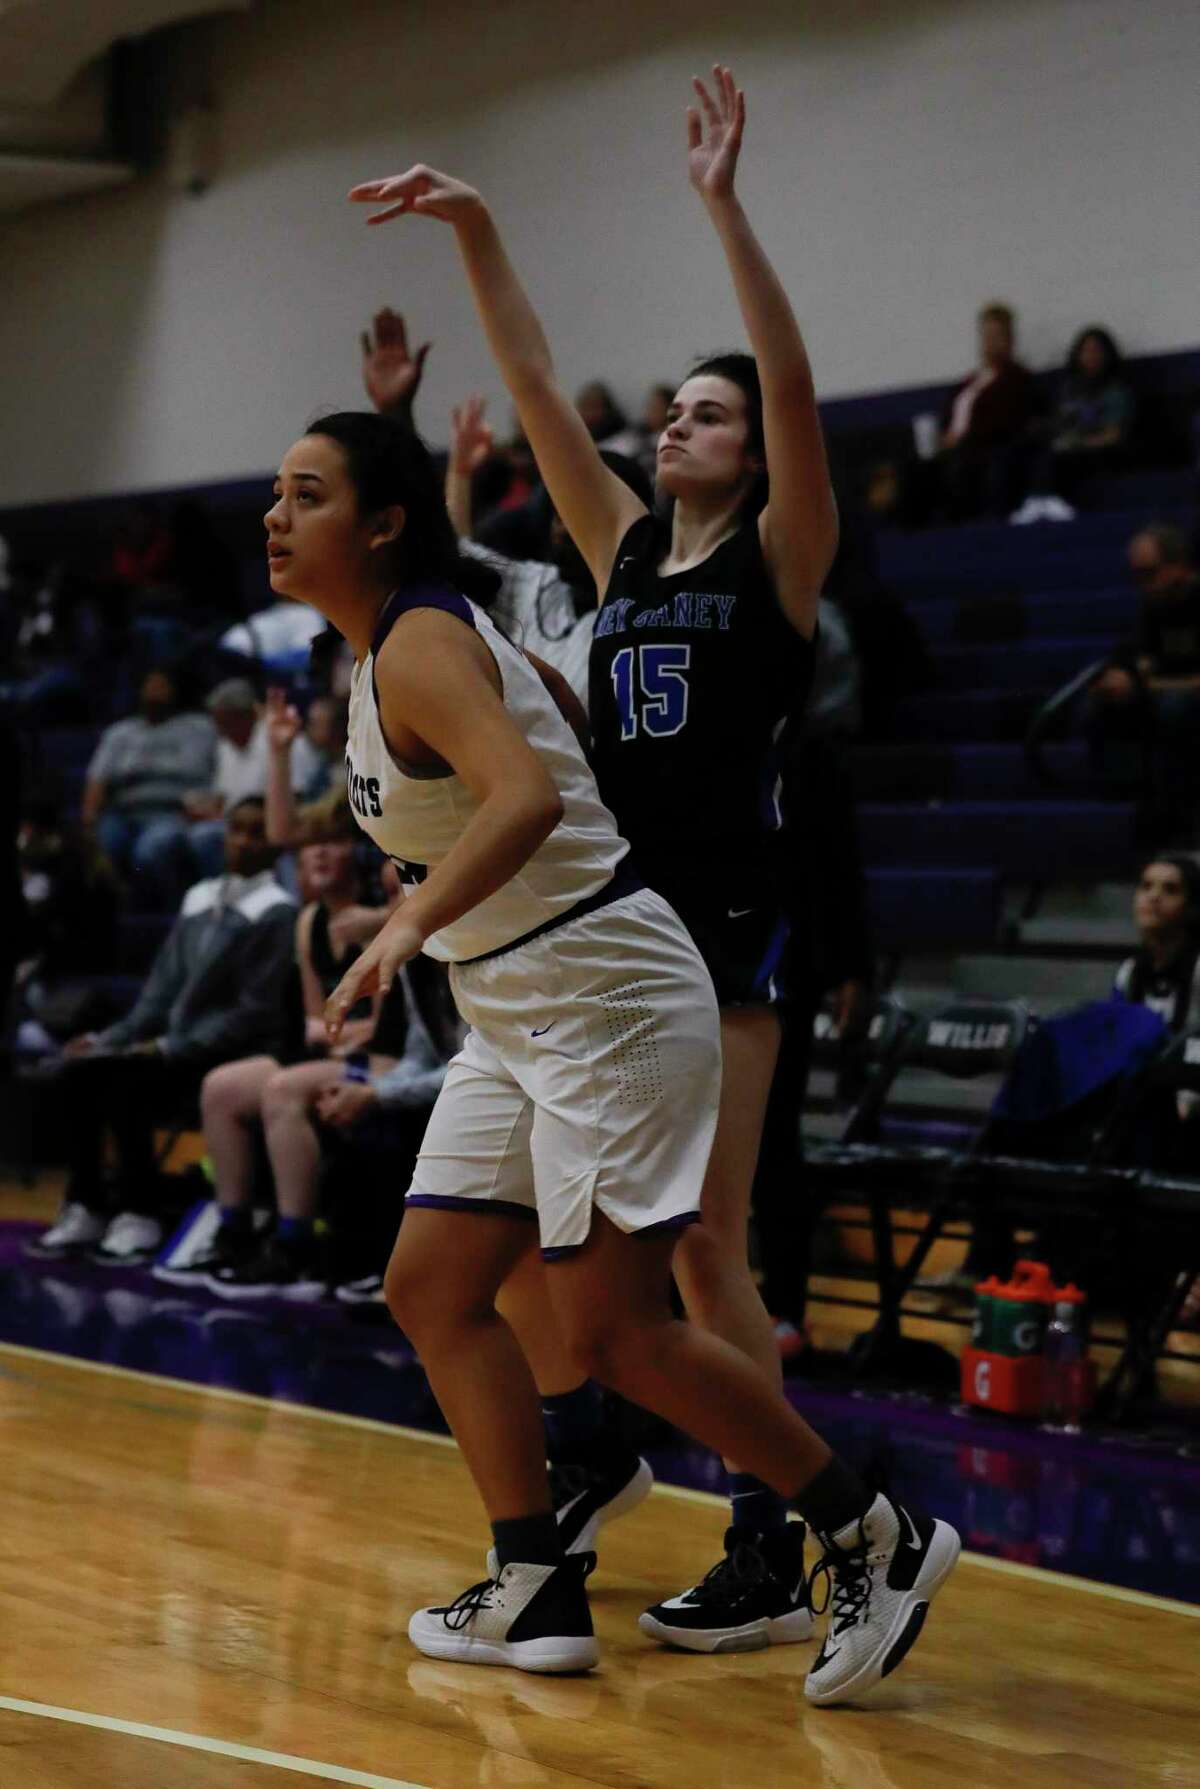 New Caney power forward Michael Mize (15) watches as her 3-pointer falls during the third quarter of a District 20-5A high school basketball game at Willis High School, Tuesday, Jan. 14, 2020, in Willis.